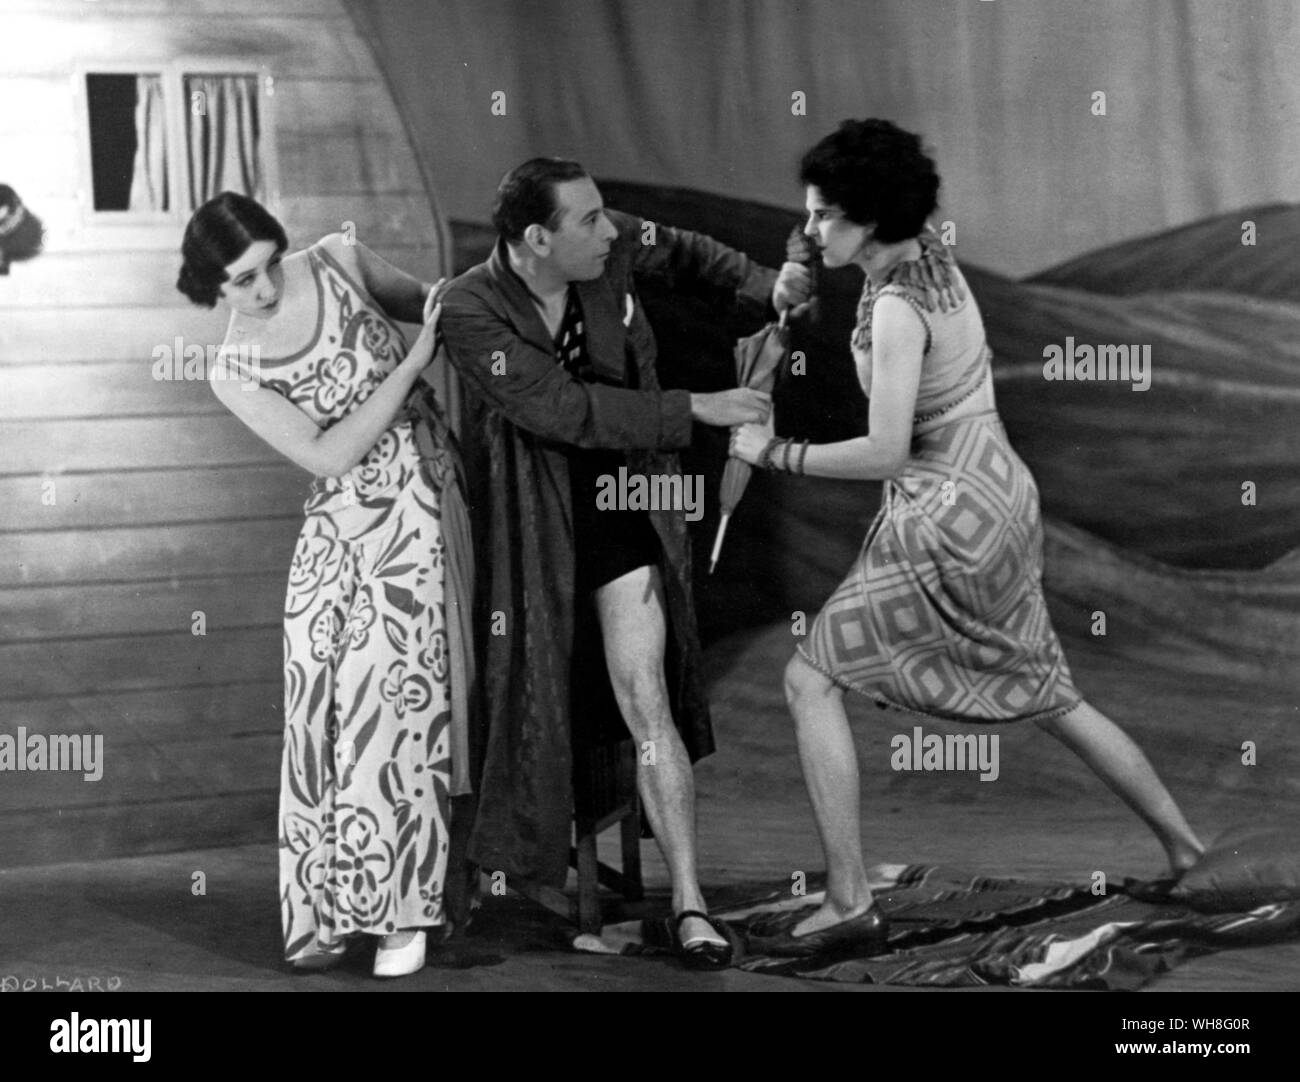 A 1932 production of Too Good to be True at the New Theatre with Leonara Corbett as the patient, Ernest Thesiger as Monsieur, Donald Wolfit as the doctor, Ellen Pollach as the nurse and Cedric Hardwicke as the burglar. The Genius of Shaw page 147. Stock Photo